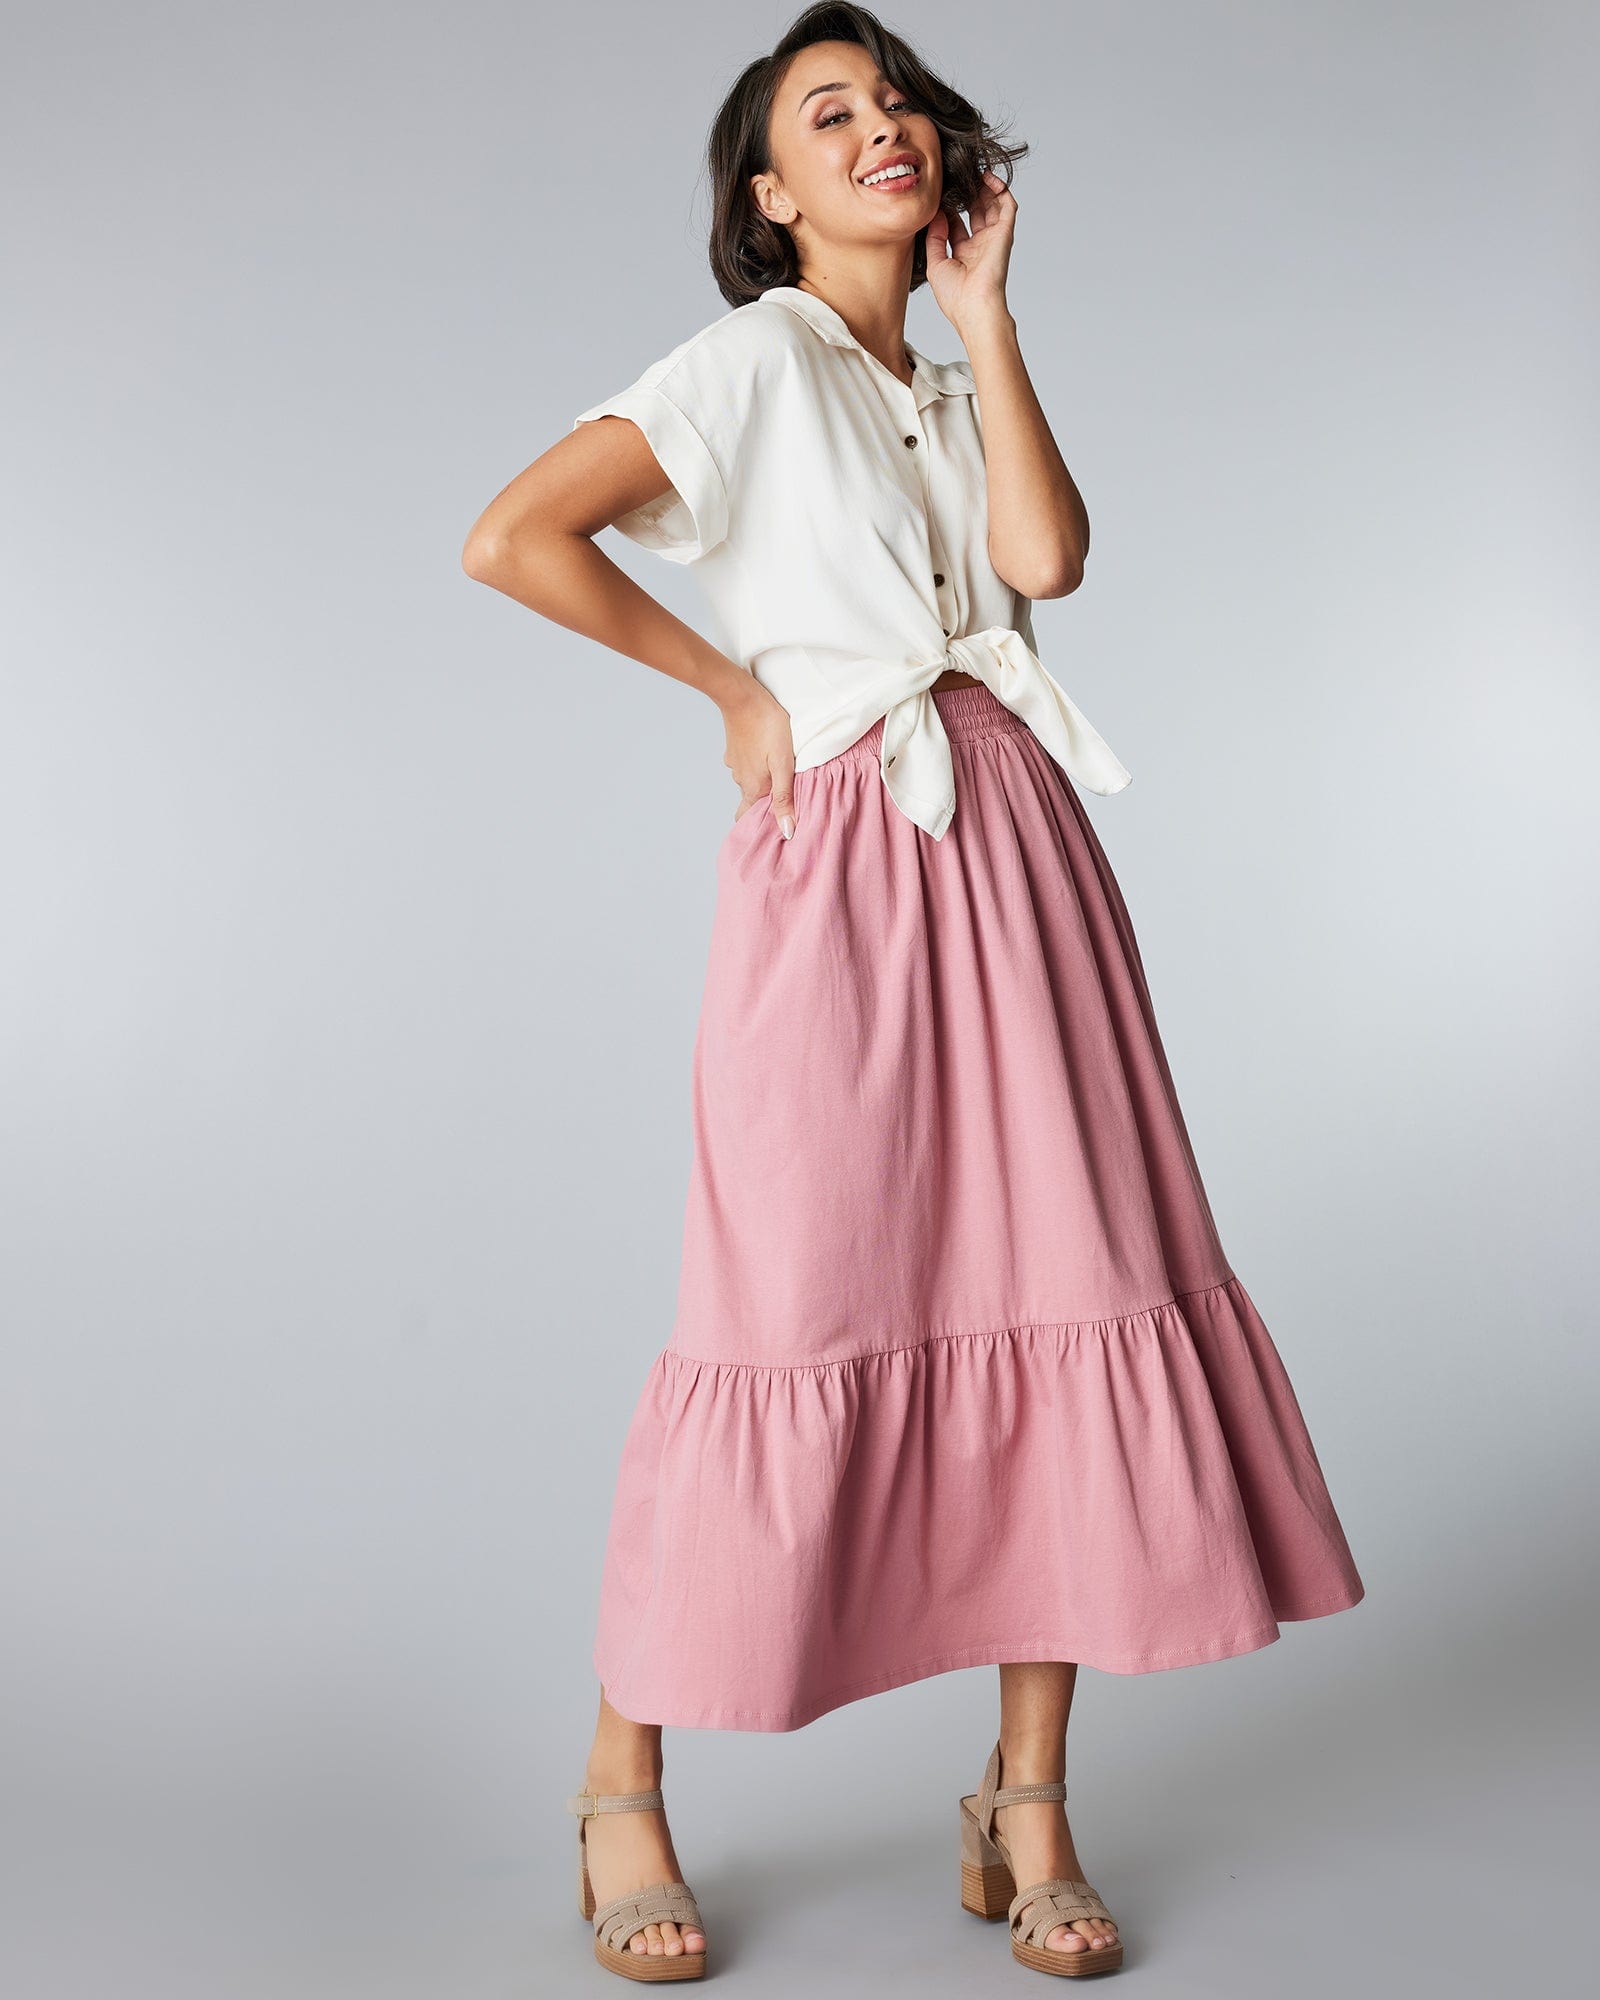 Woman in a pink, tiered, midi skirt